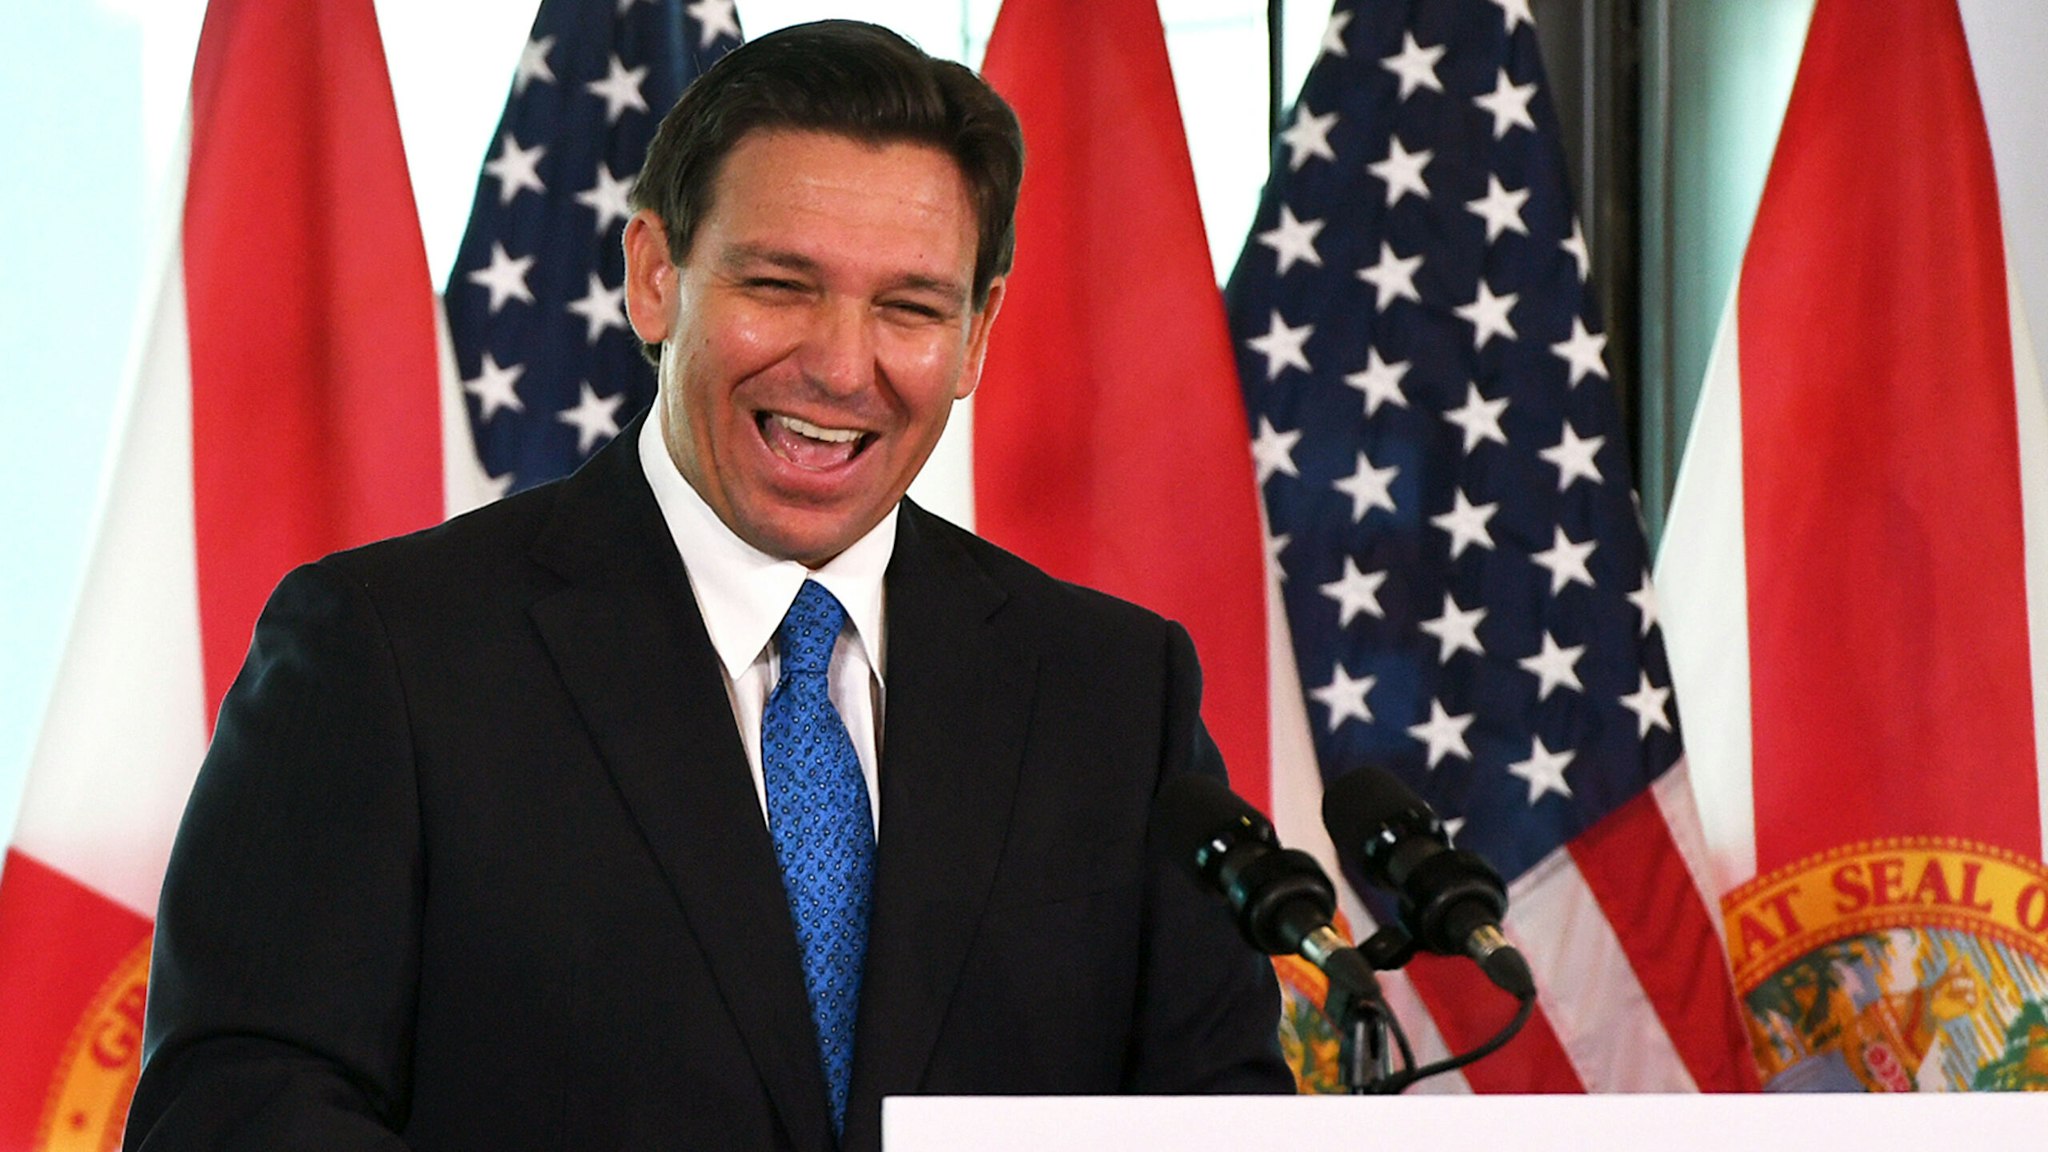 AUBURNDALE, FLORIDA, UNITED STATES - 2023/01/30: Florida Gov. Ron DeSantis laughs during a press conference to announce the Moving Florida Forward initiative at the SunTrax Test Facility in Auburndale, Florida. If passed by the legislature, the proposal would expedite transportation projects over the next four years with $7 billion in funding.